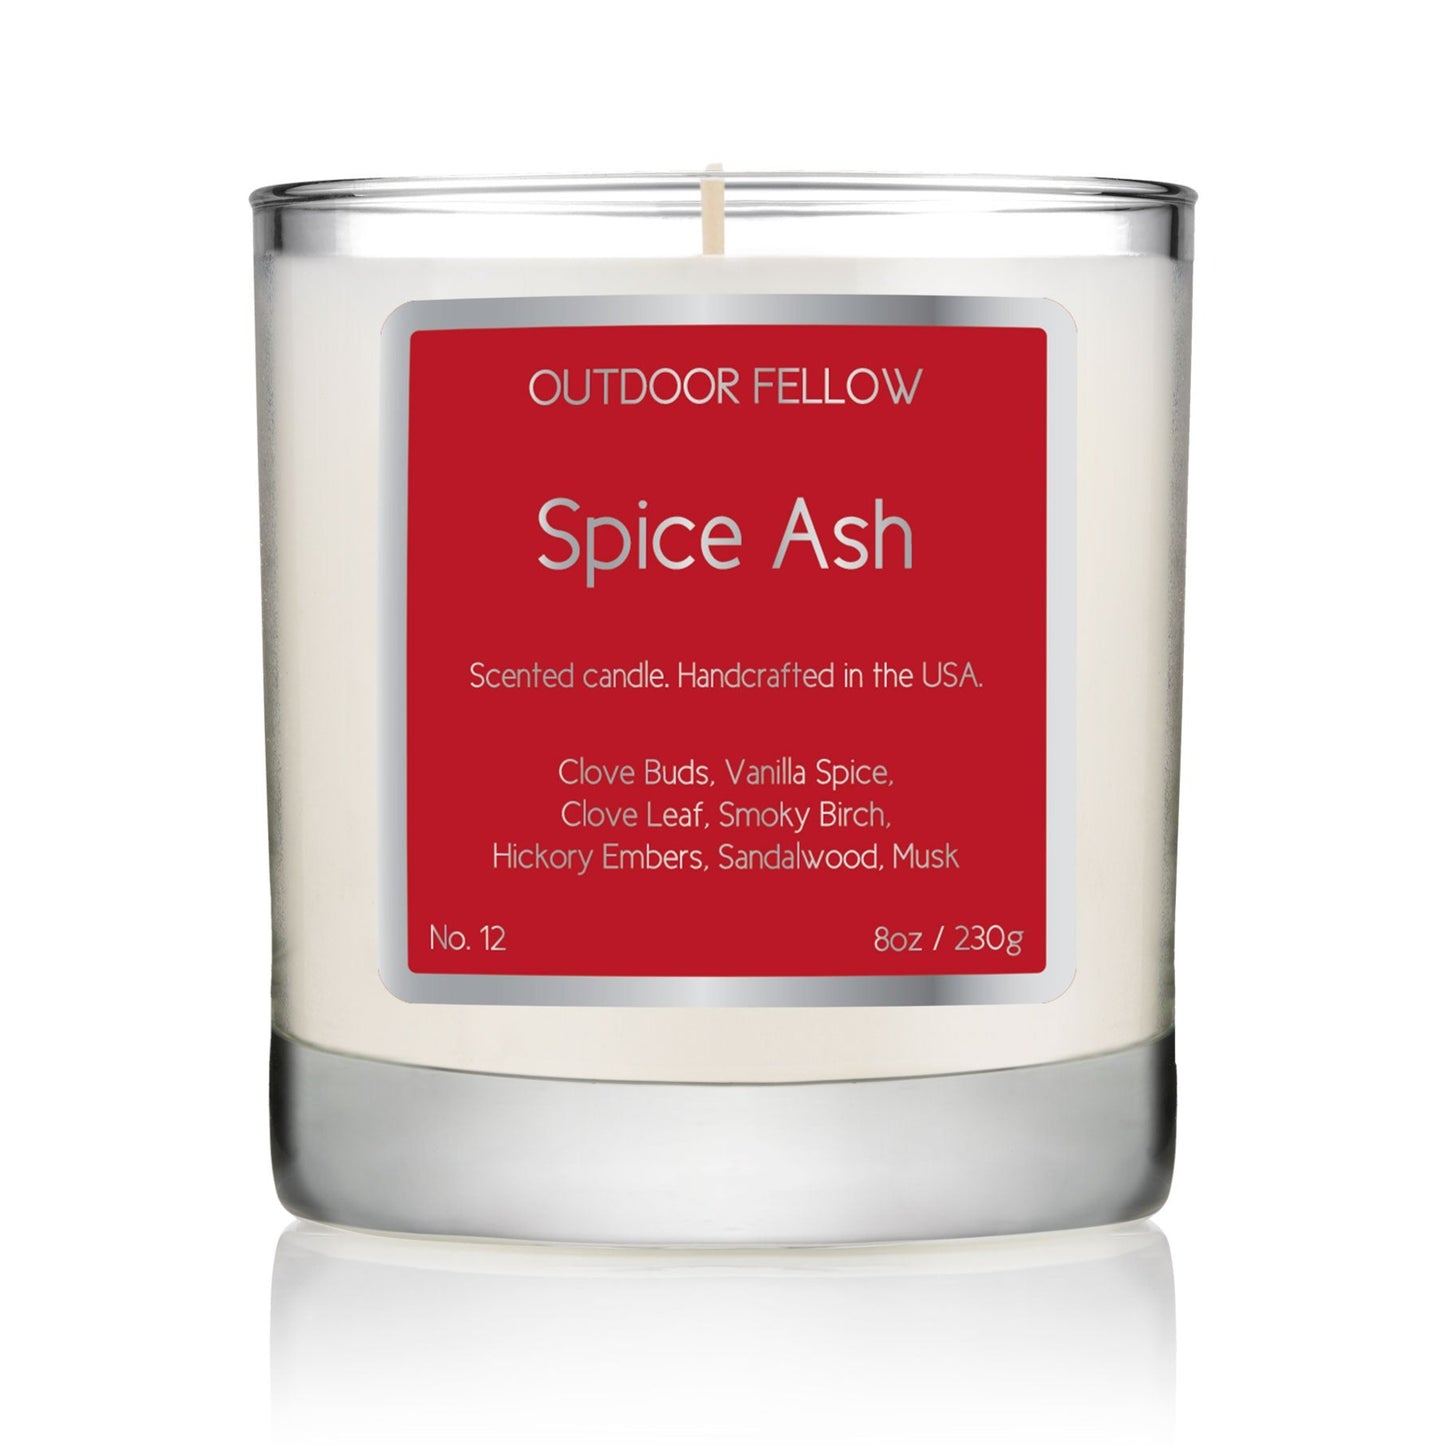 Spice Ash scented candle on white background